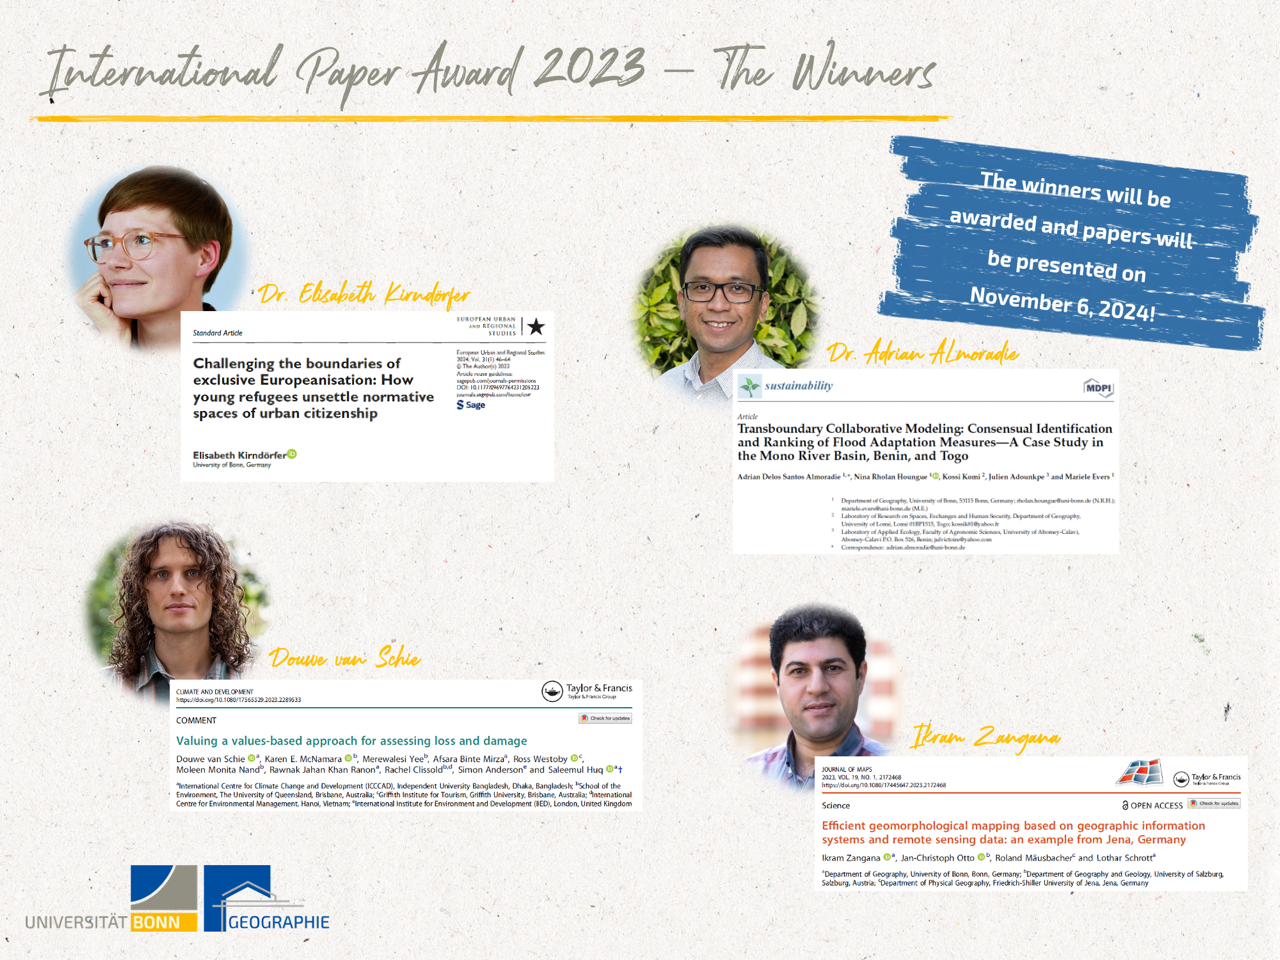 Winners of the International Paper Award 2023 at the Department of Geography